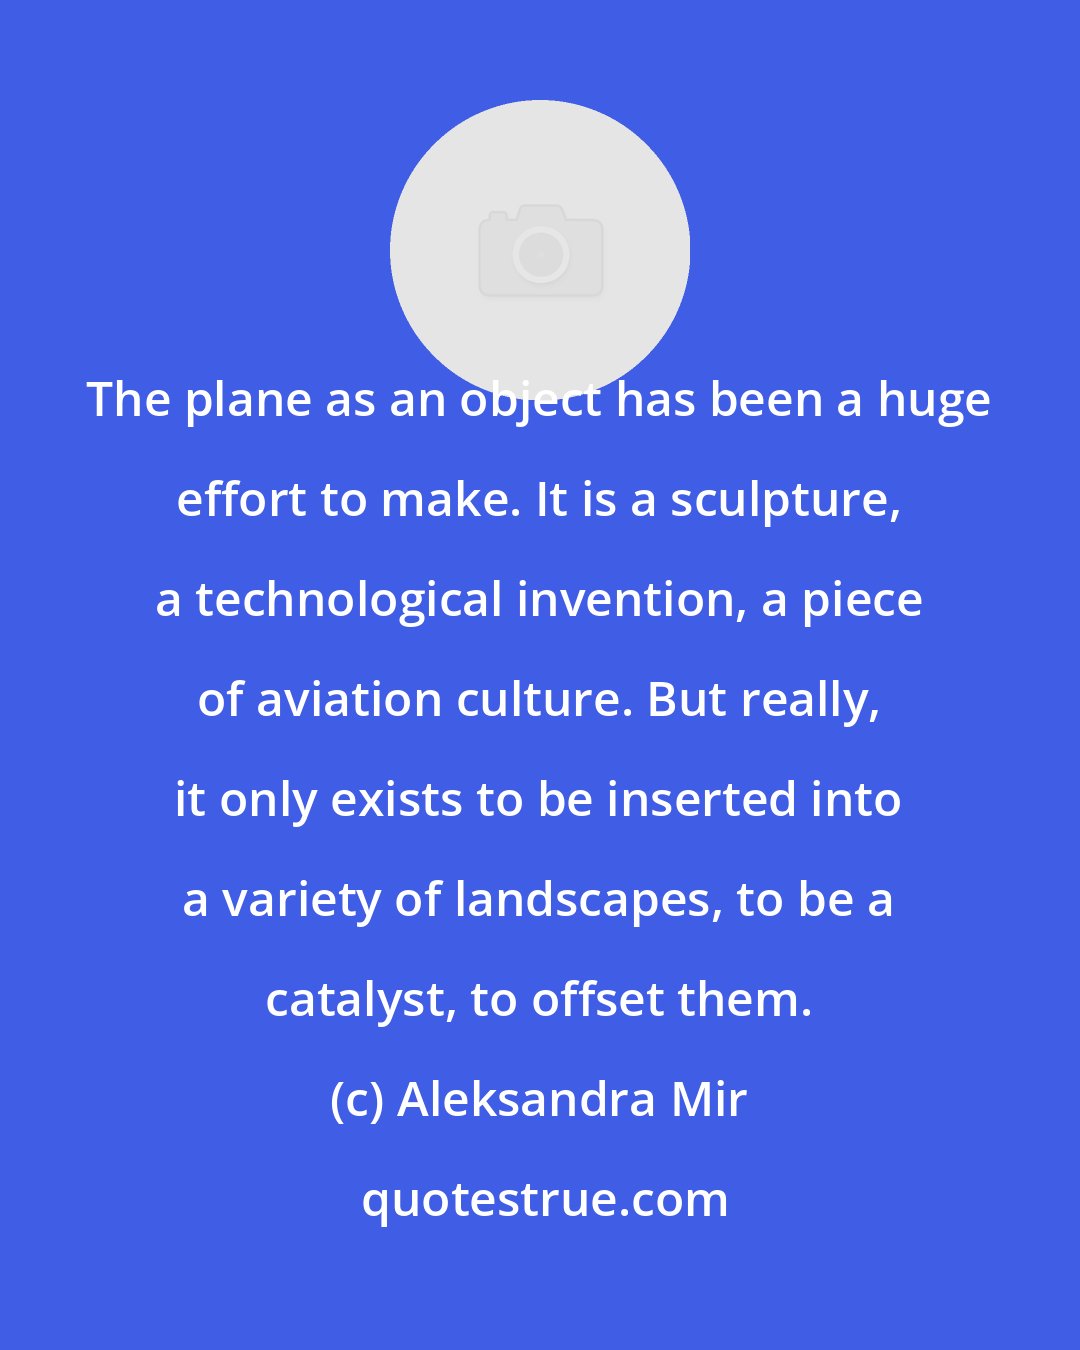 Aleksandra Mir: The plane as an object has been a huge effort to make. It is a sculpture, a technological invention, a piece of aviation culture. But really, it only exists to be inserted into a variety of landscapes, to be a catalyst, to offset them.